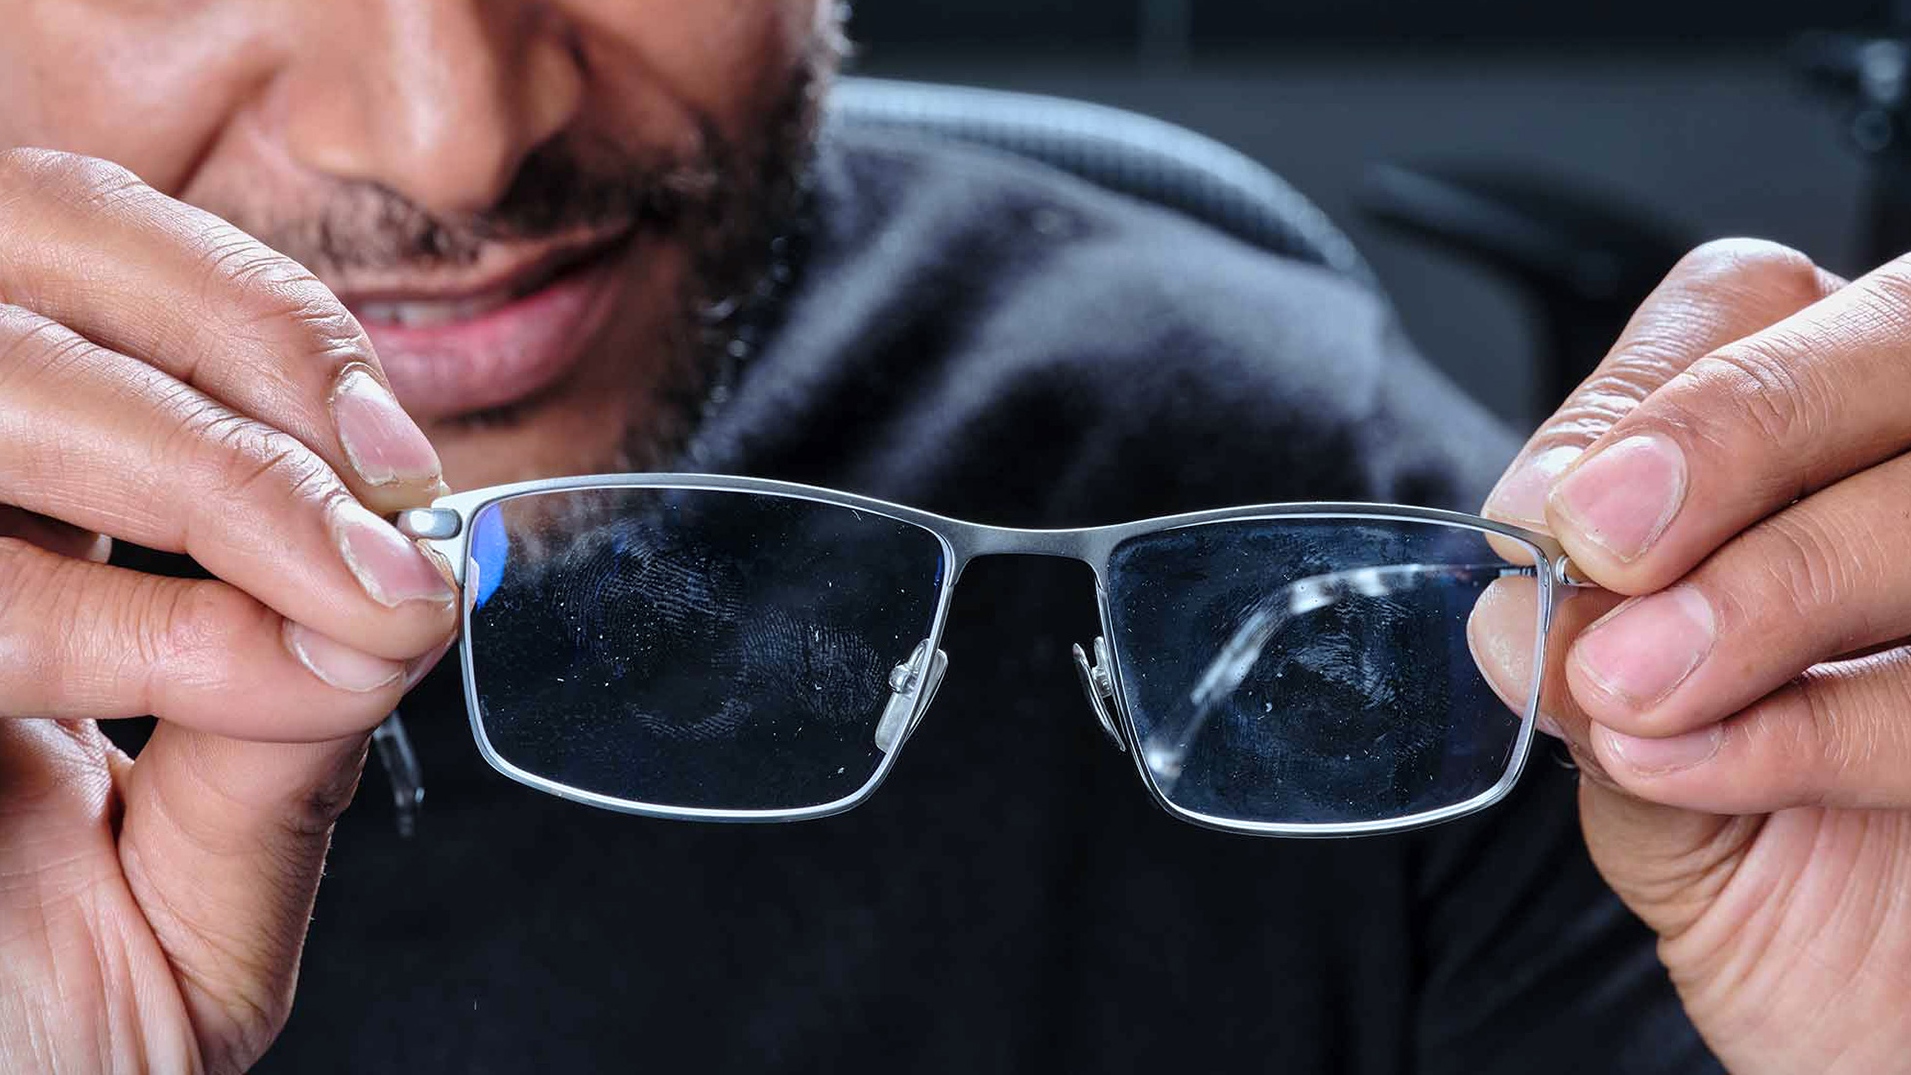 3. Scratches can't be wiped away, no matter if you have plastic or glass lenses